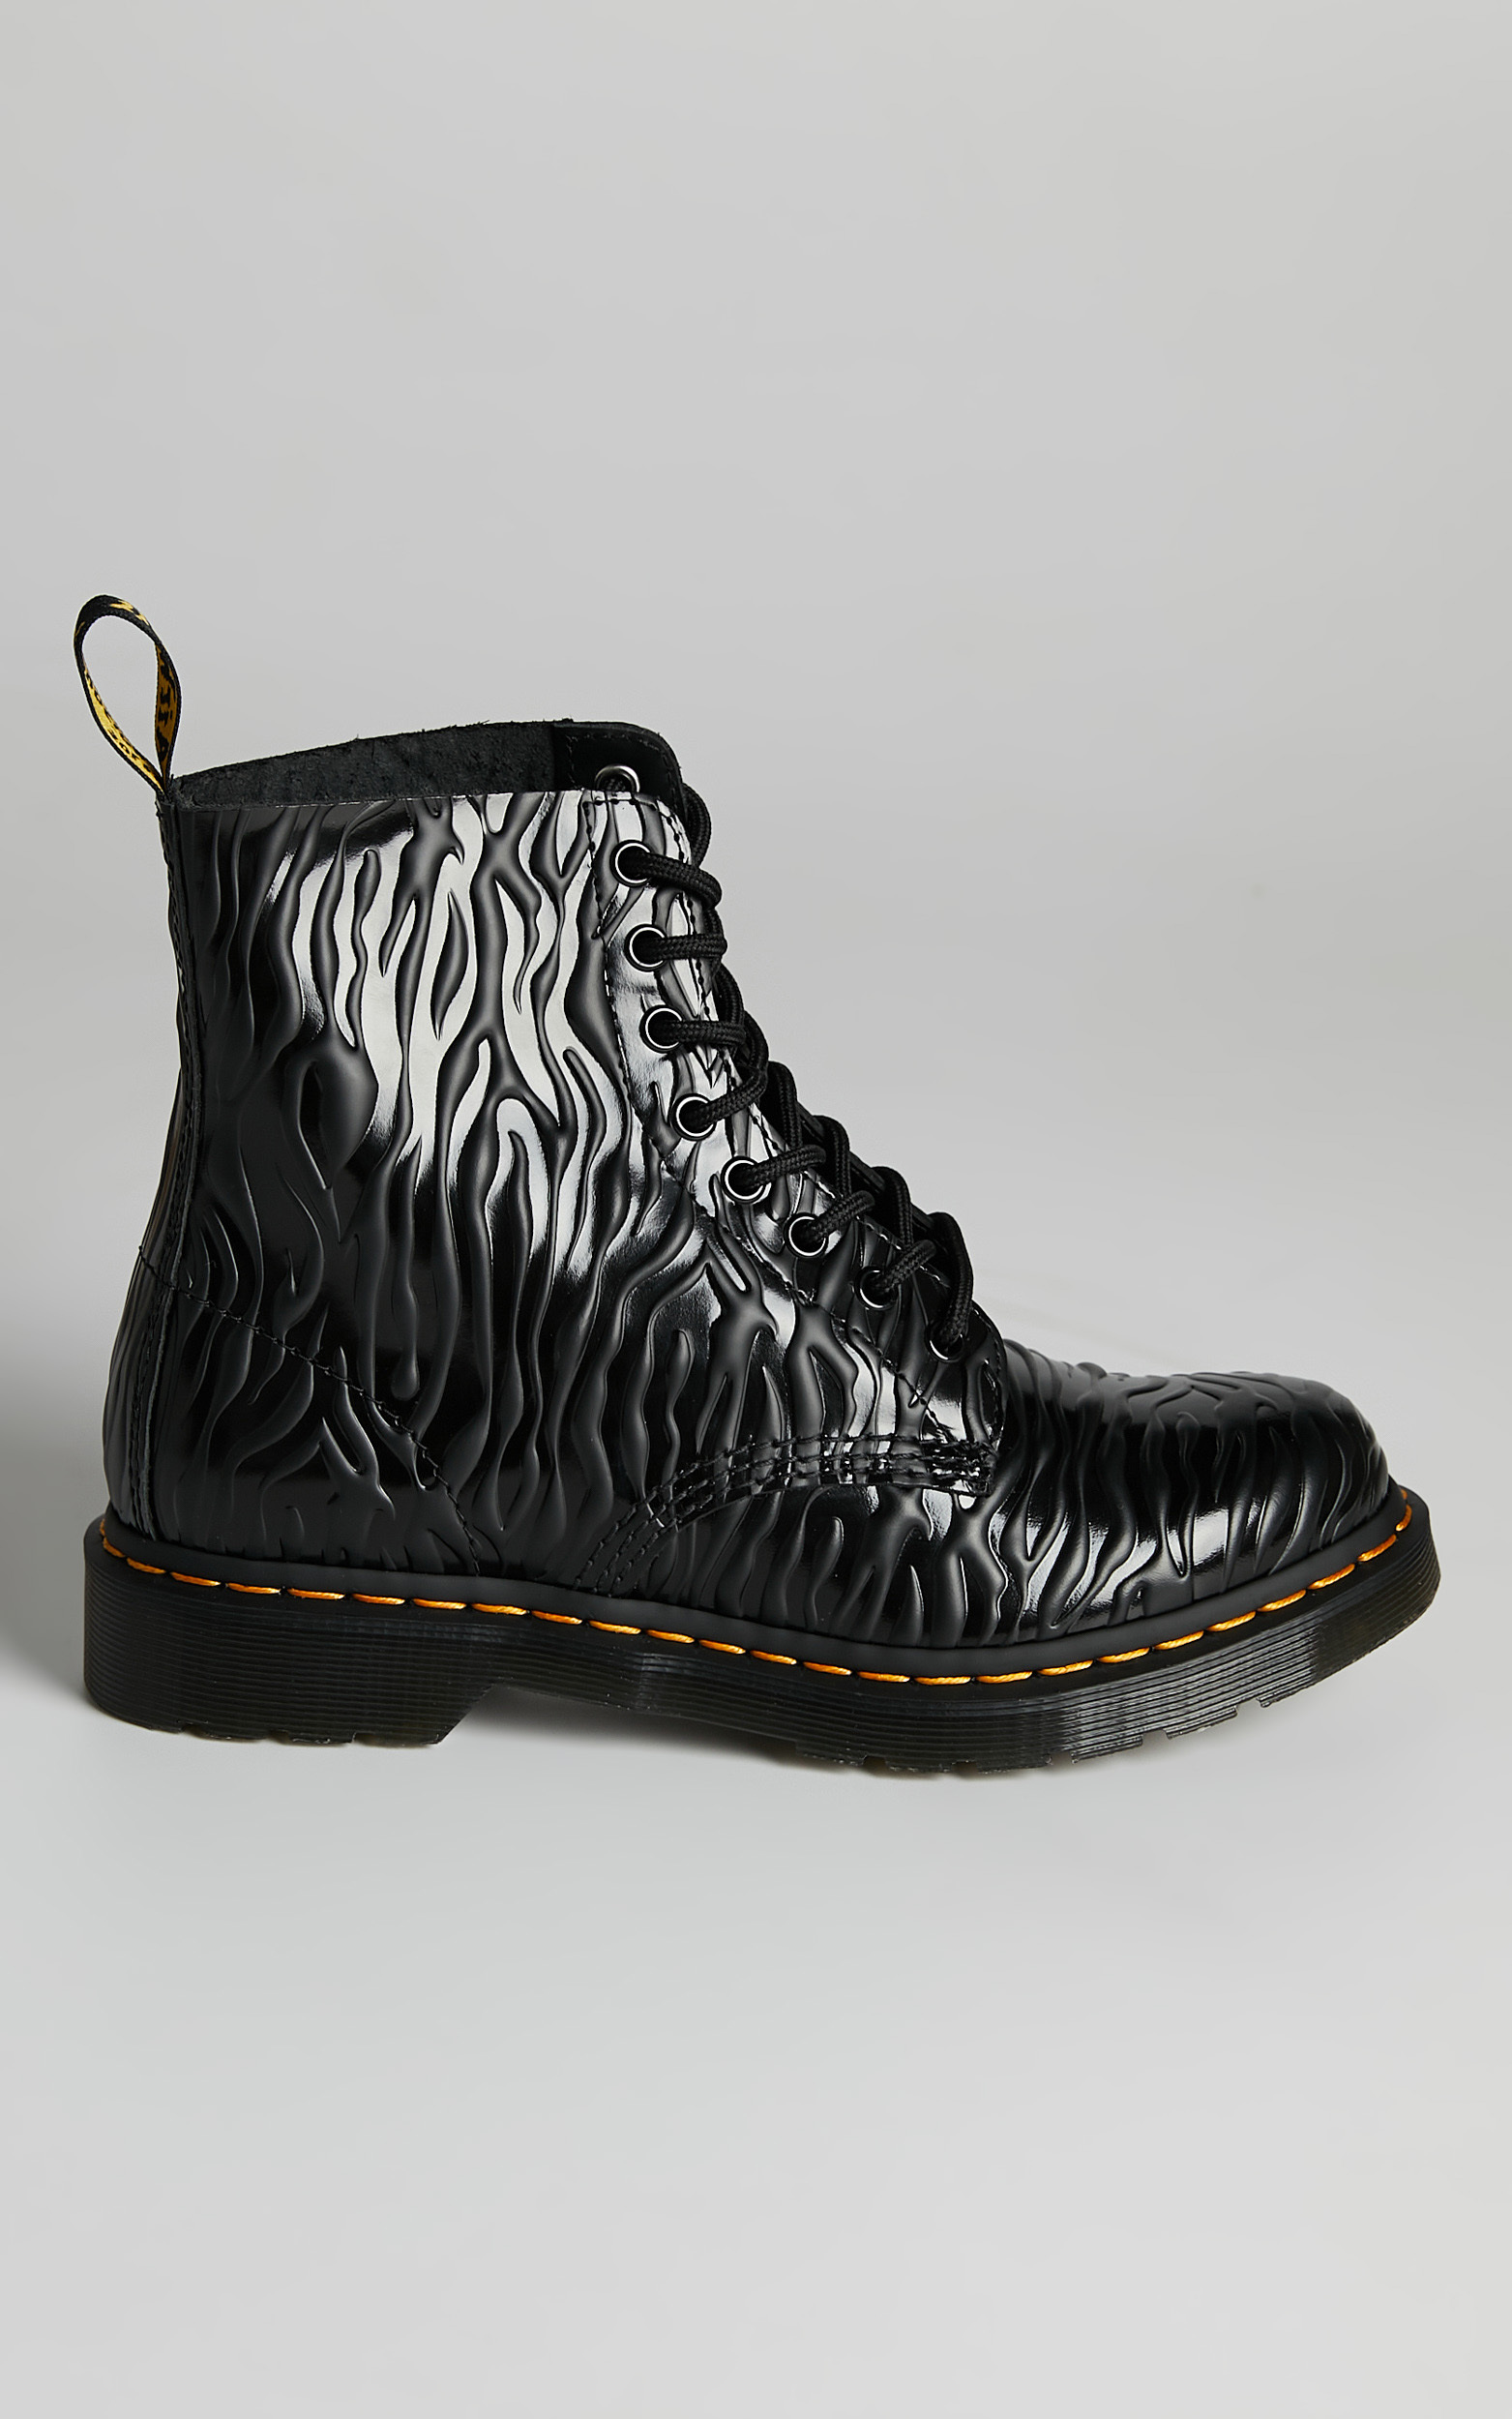 Dr. Martens - 1460 Pascal 8 Eye Boot in Black Zebra Gloss Emboss Smooth - 05, BLK1, hi-res image number null